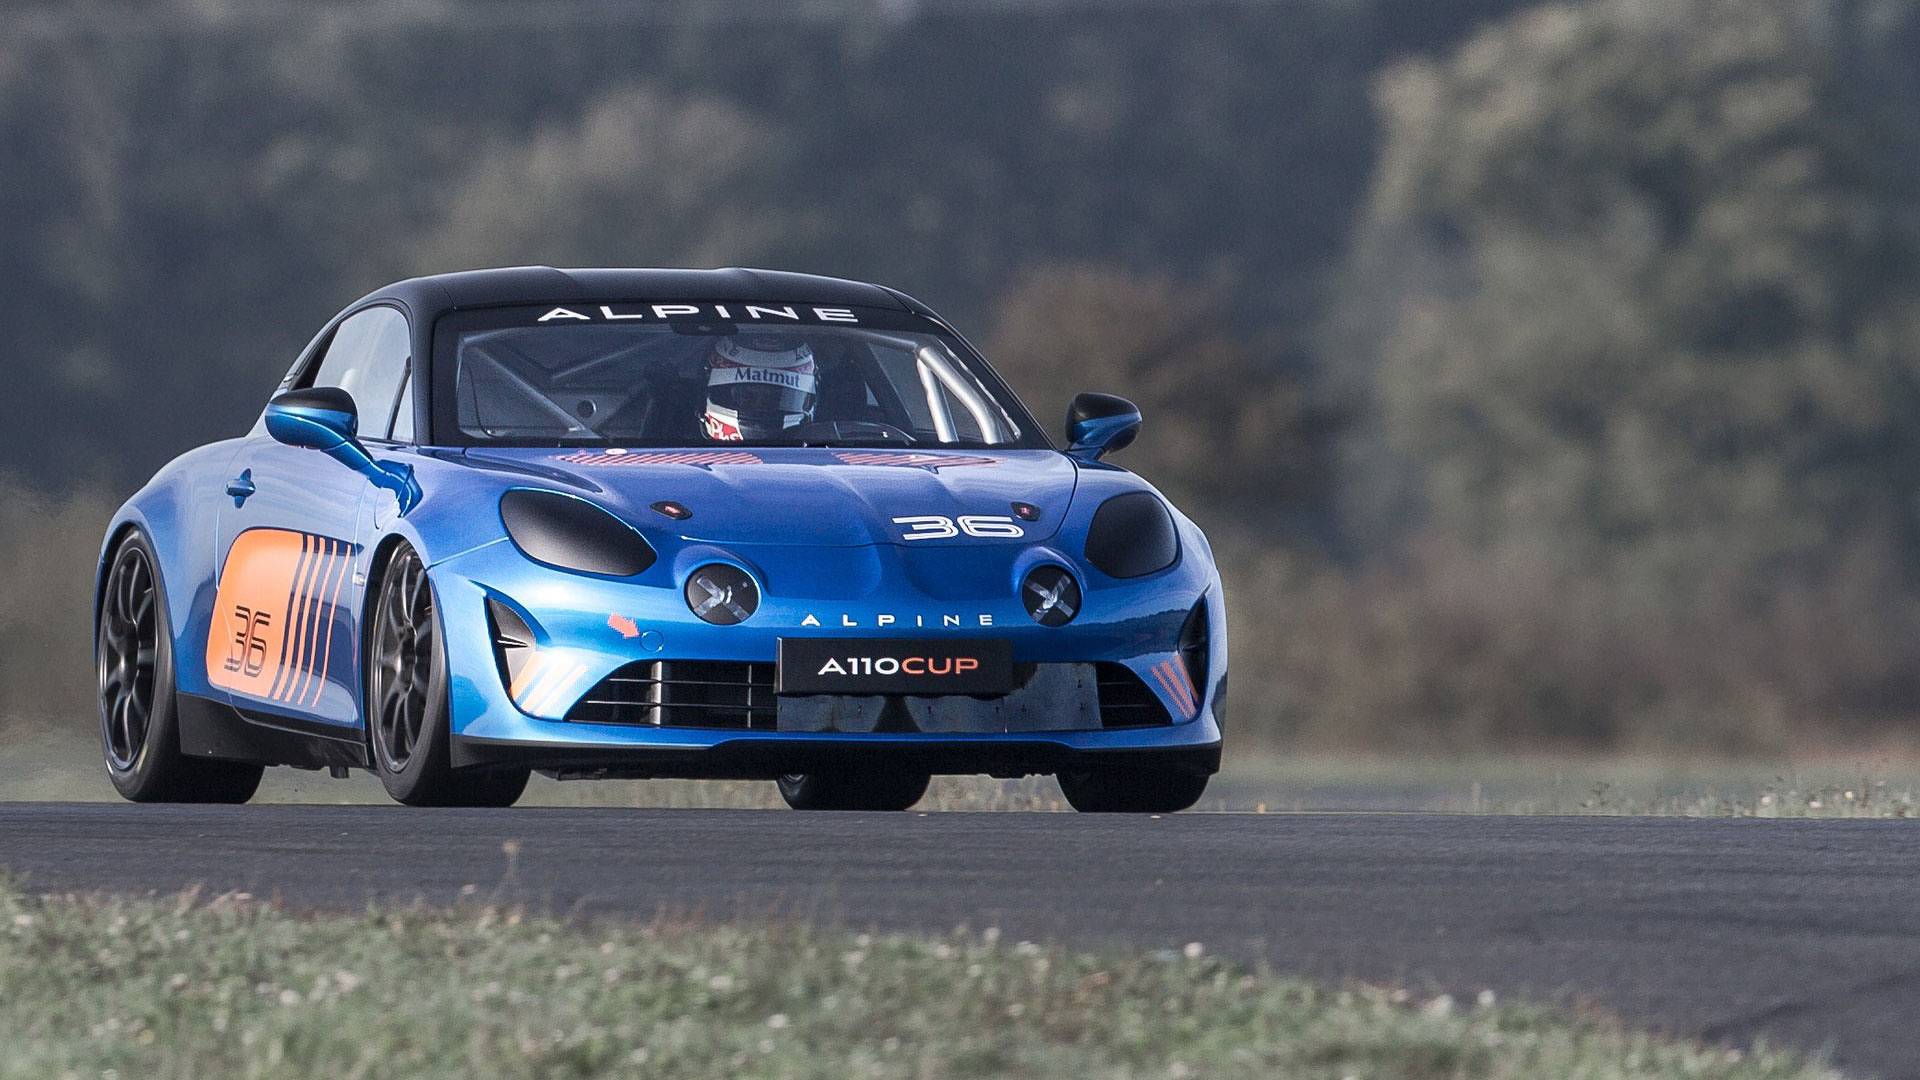 Renault Reveals Alpine A110 Cup Race Car for One-Make Series.